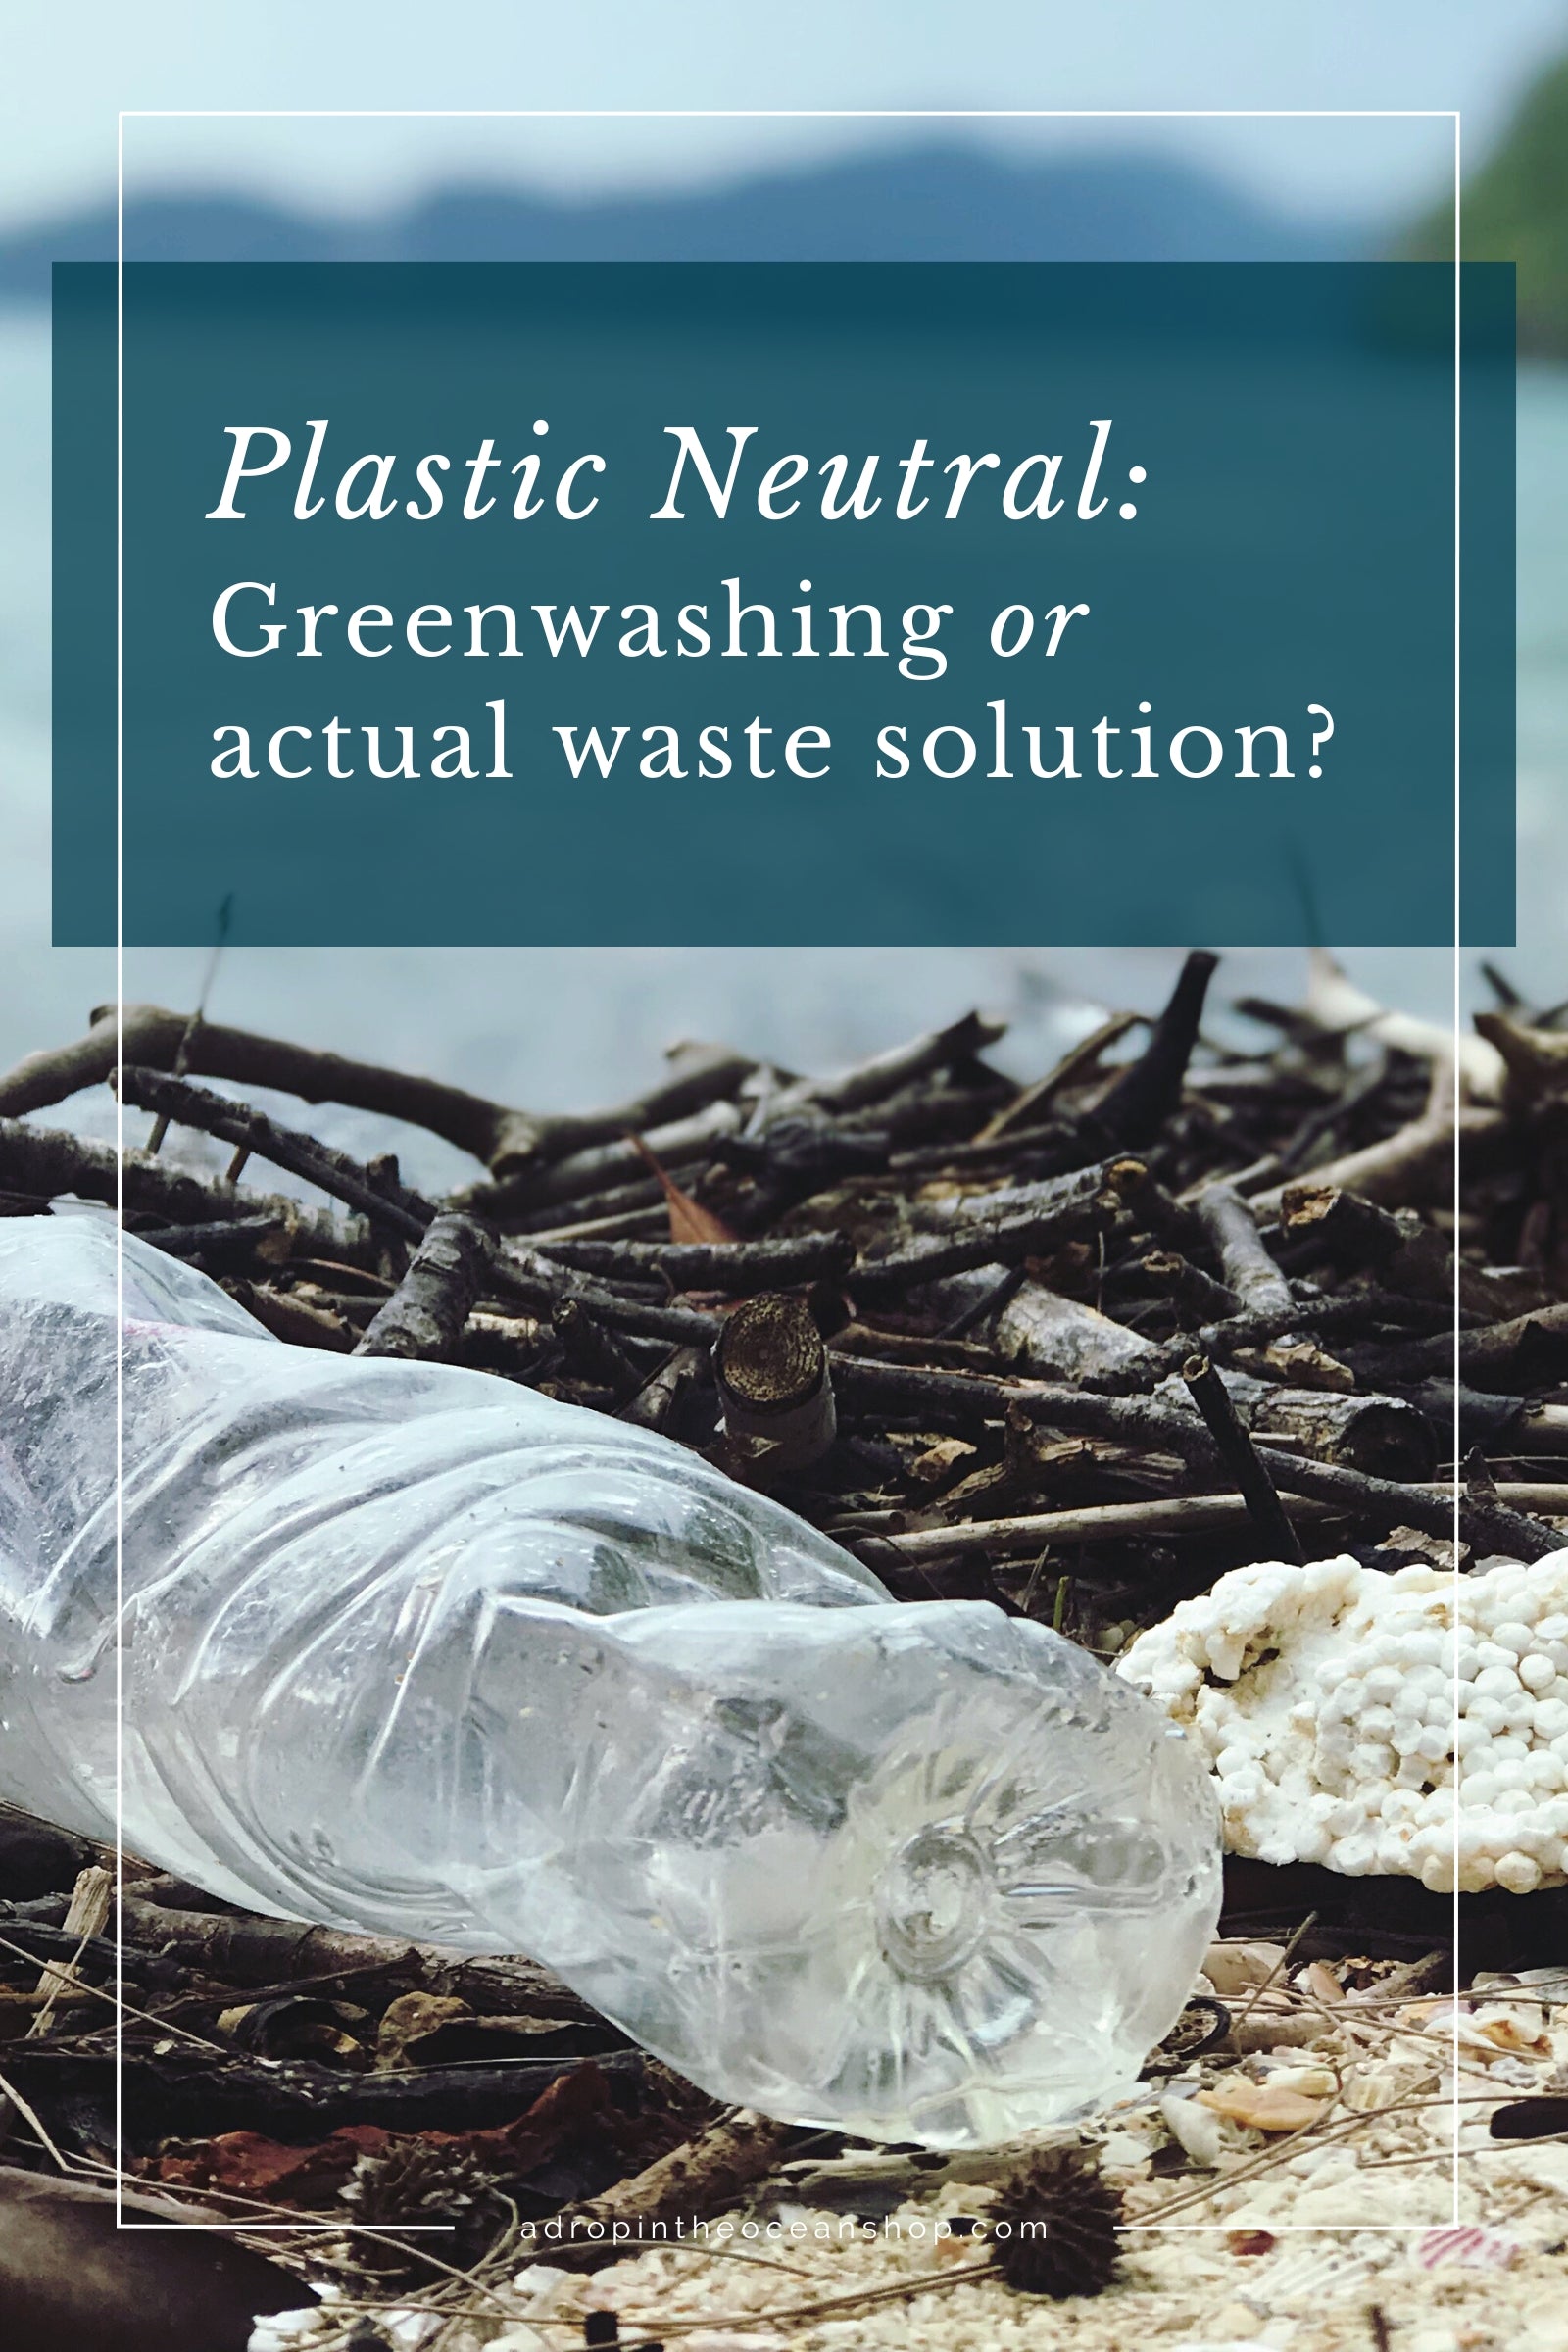 Plastic Neutral: Greenwashing or Actual Waste Solution?